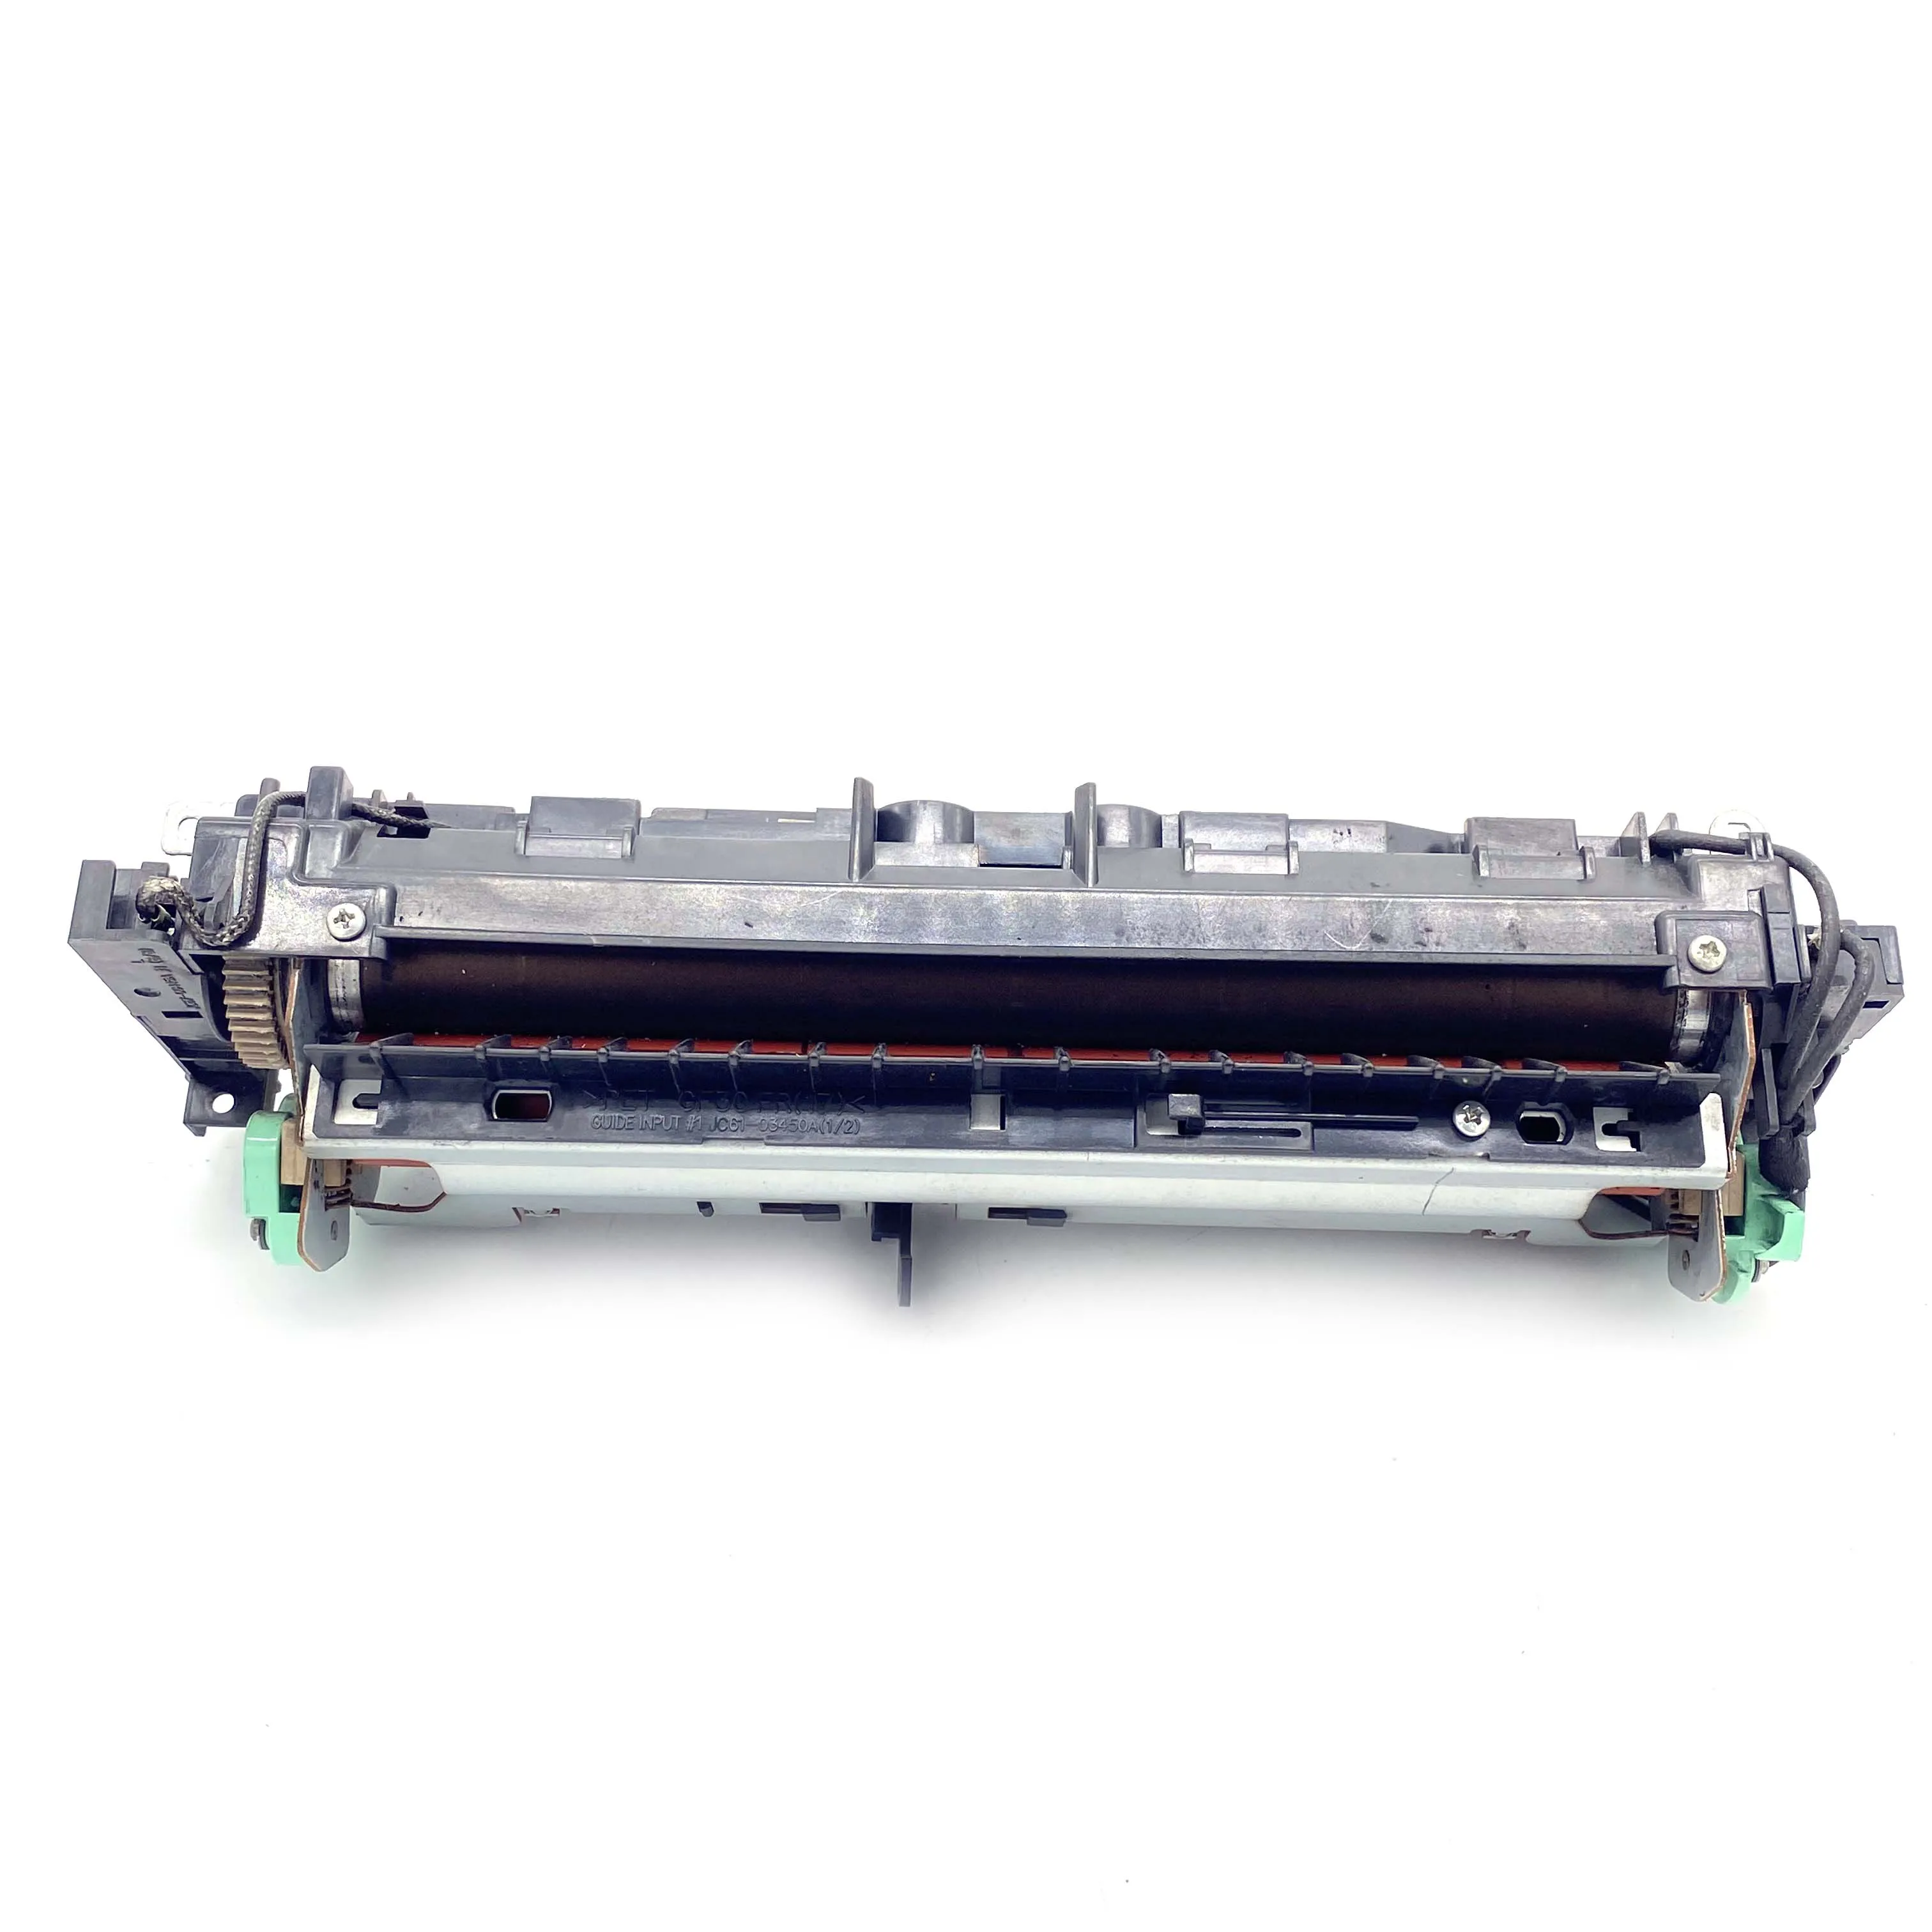 

Fuser Unit Fixing Fuser Assembly SCX-4623F 220V JC61-03450A fits for Samsung 3405 4833 4321NS 4623 3401FH 4521HS 4835